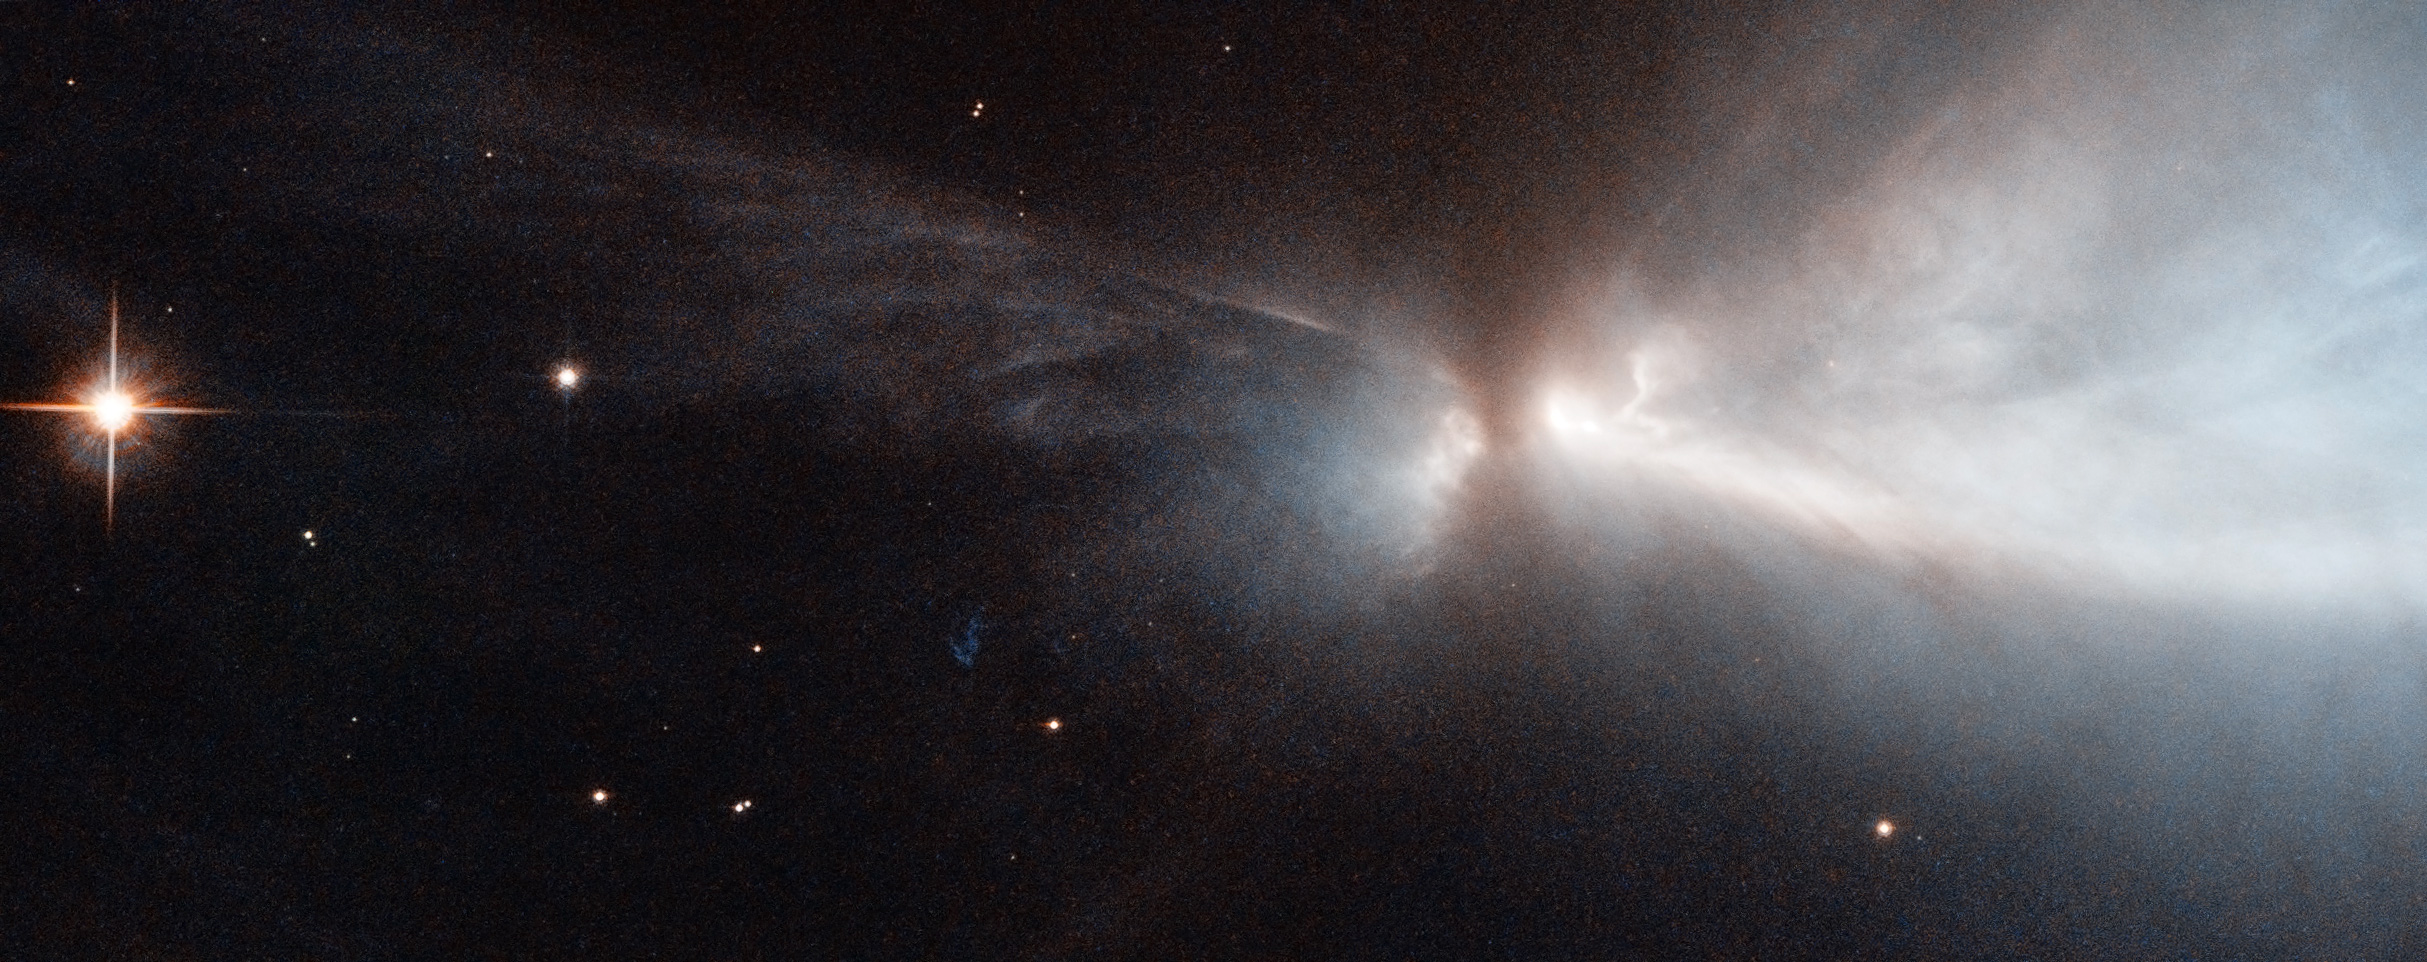 NASA and ESA Hubble Space Telescope. Acknowledgements: Kevin Luhman (Pennsylvania State University), and Judy Schmidt, of the Chamaeleon cloud and a newly-forming star within it?HH 909A?emitting narrow streams of gas from its poles.